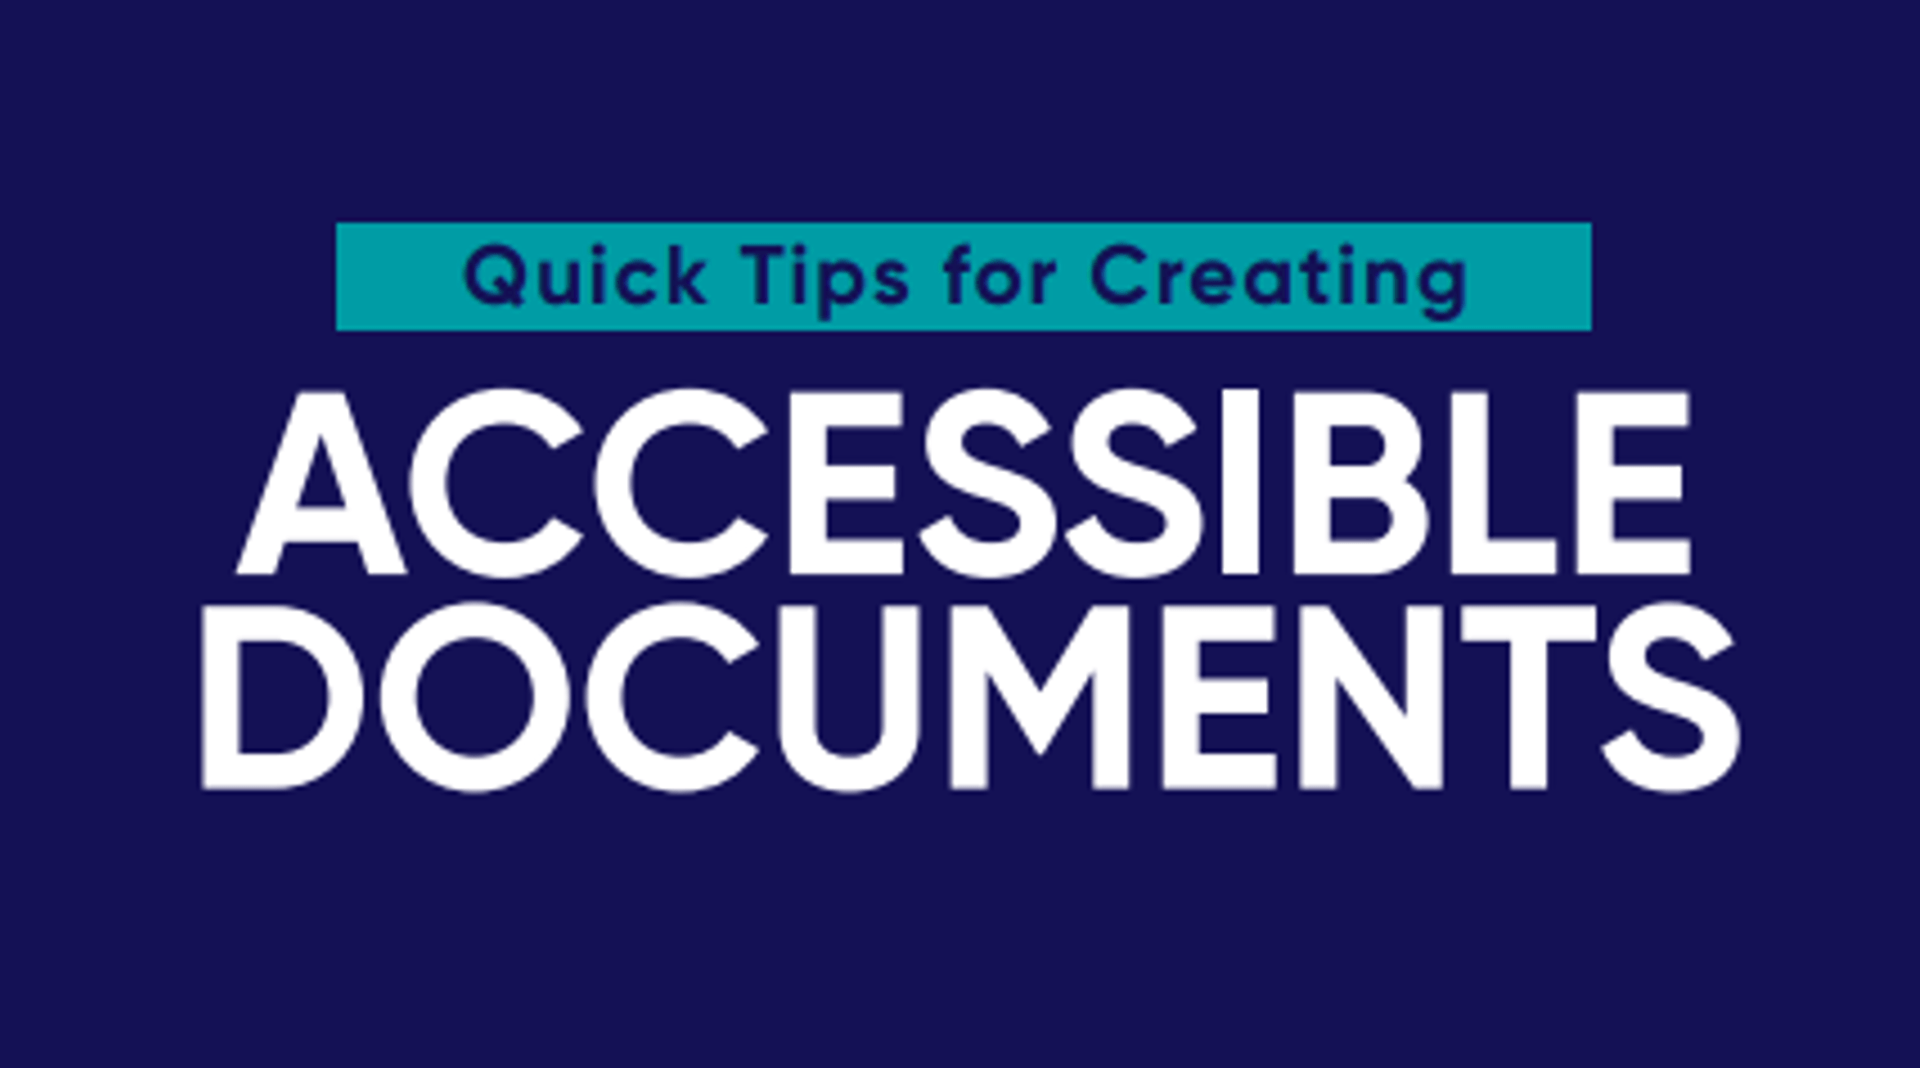 Quick Tips for Creating Accessible Documents